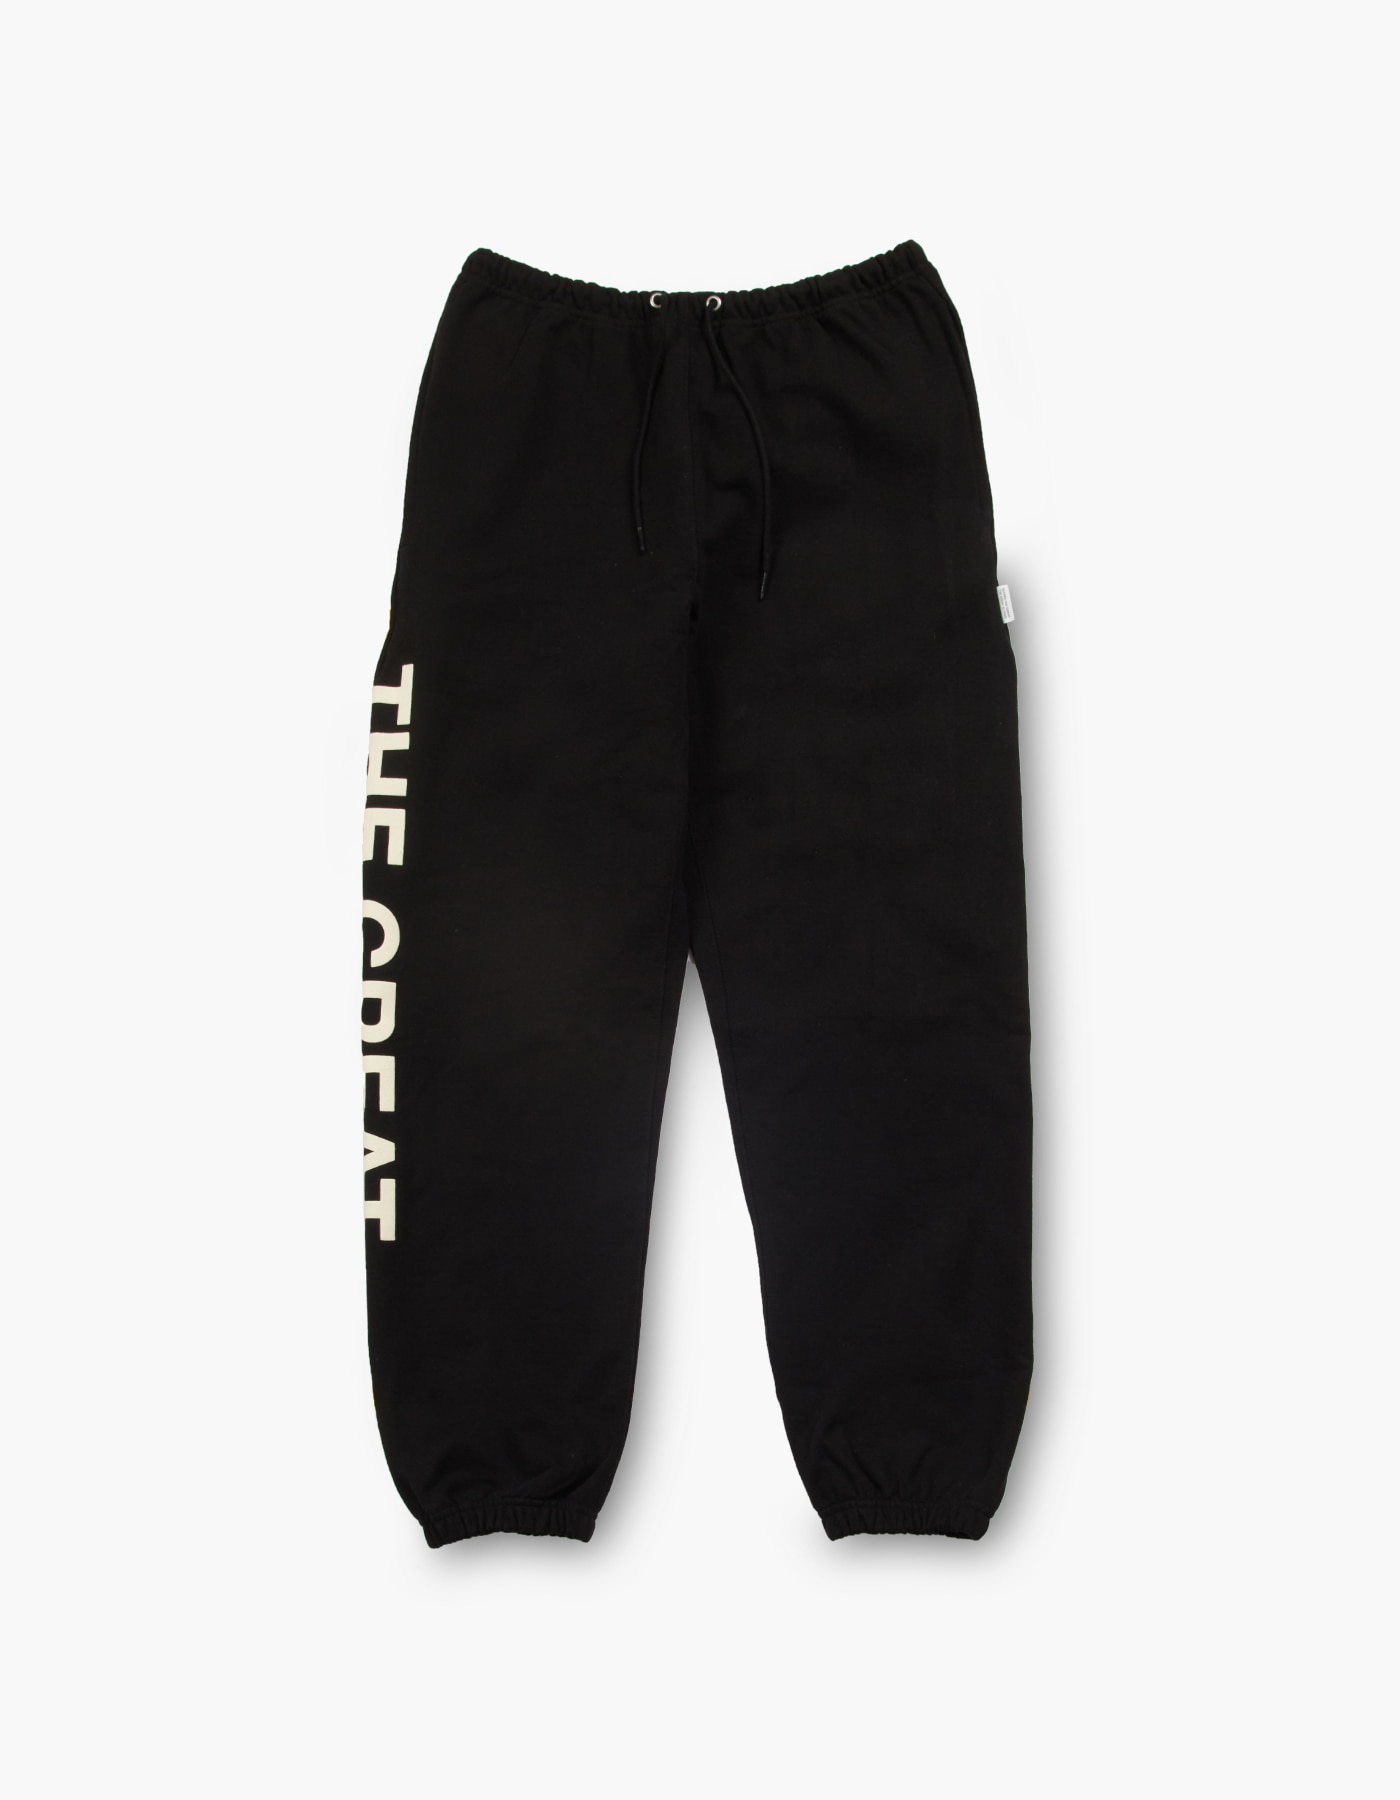 FRED THE GREAT JOGGER PANTS / BLACK